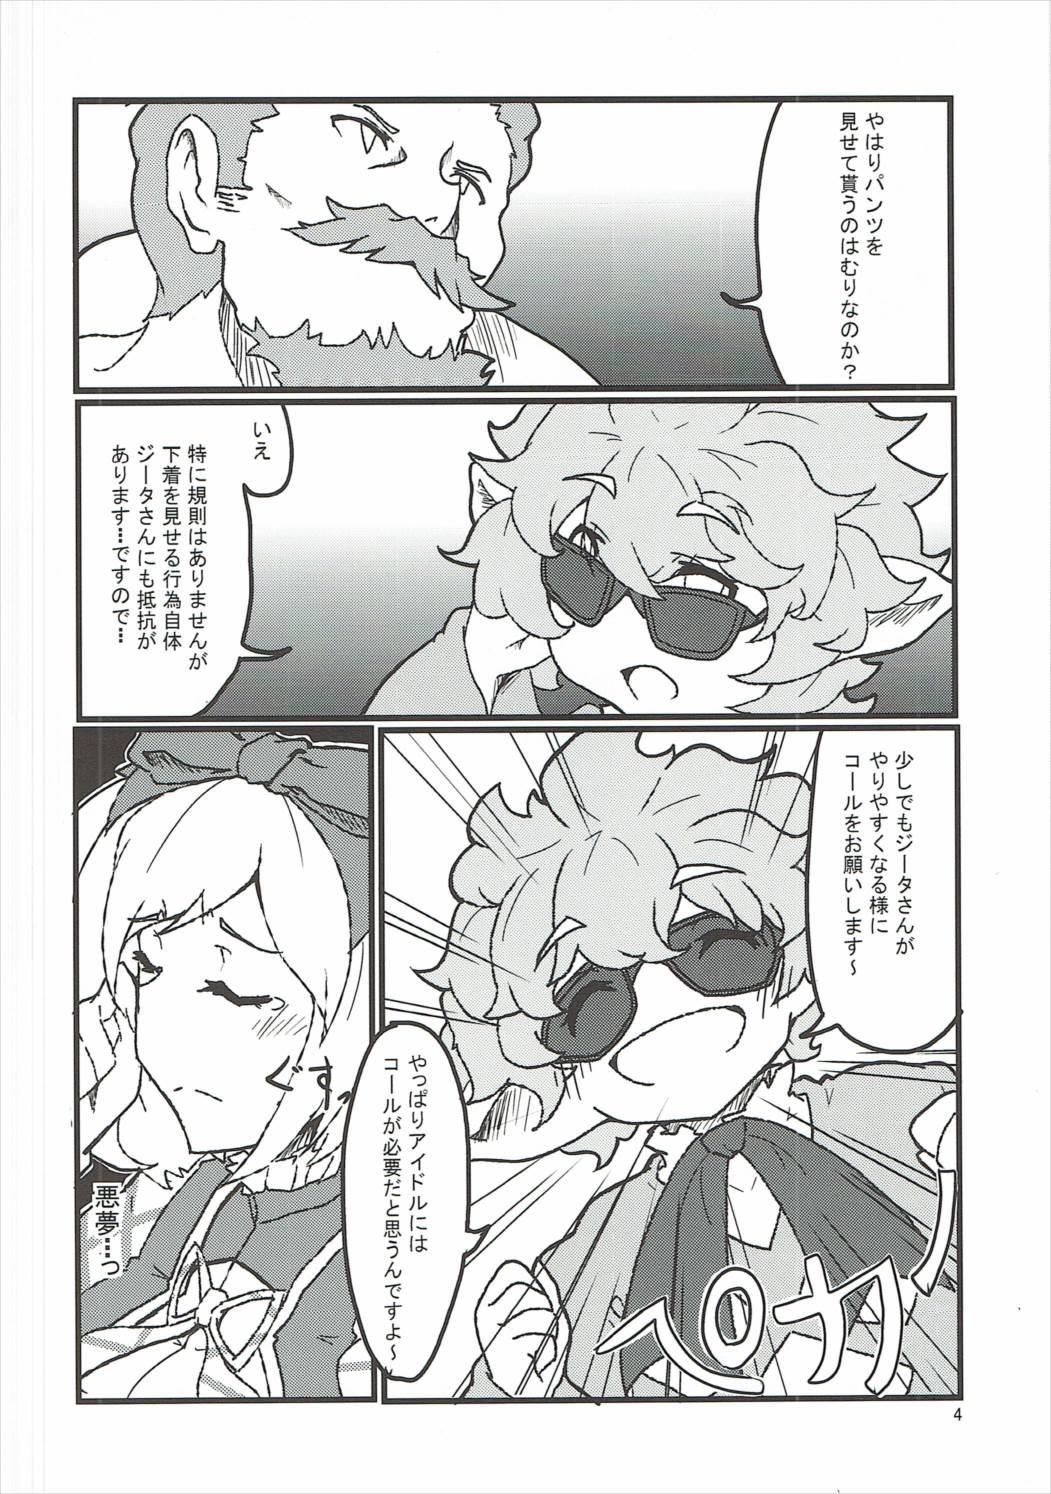 Licking Pussy Surprise Ticket - Granblue fantasy Footjob - Page 5